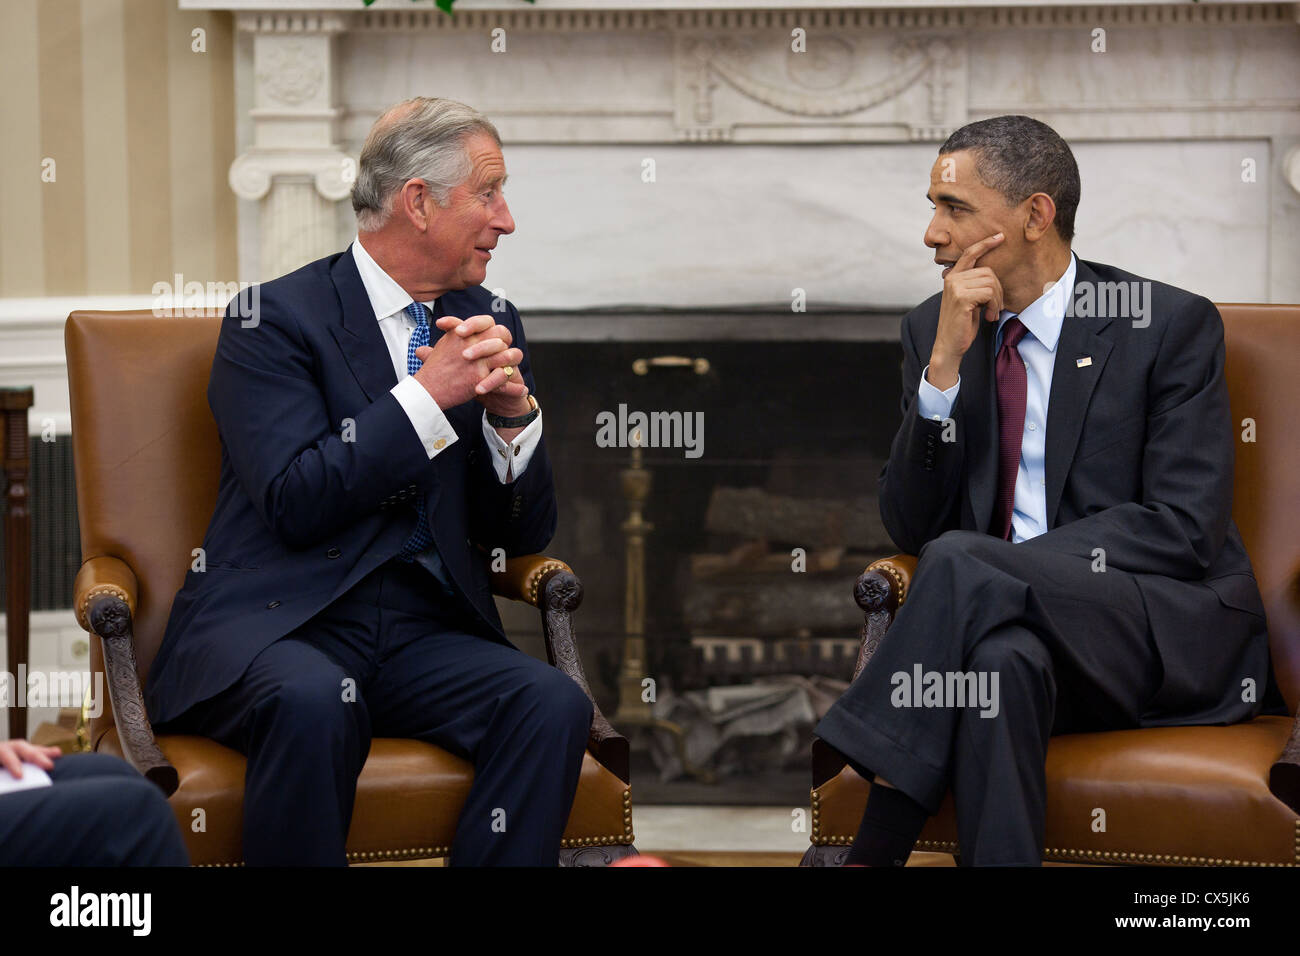 US President Barack Obama meets with Prince Charles, Prince of Wales May 4, 2011 in the Oval Office. Stock Photo